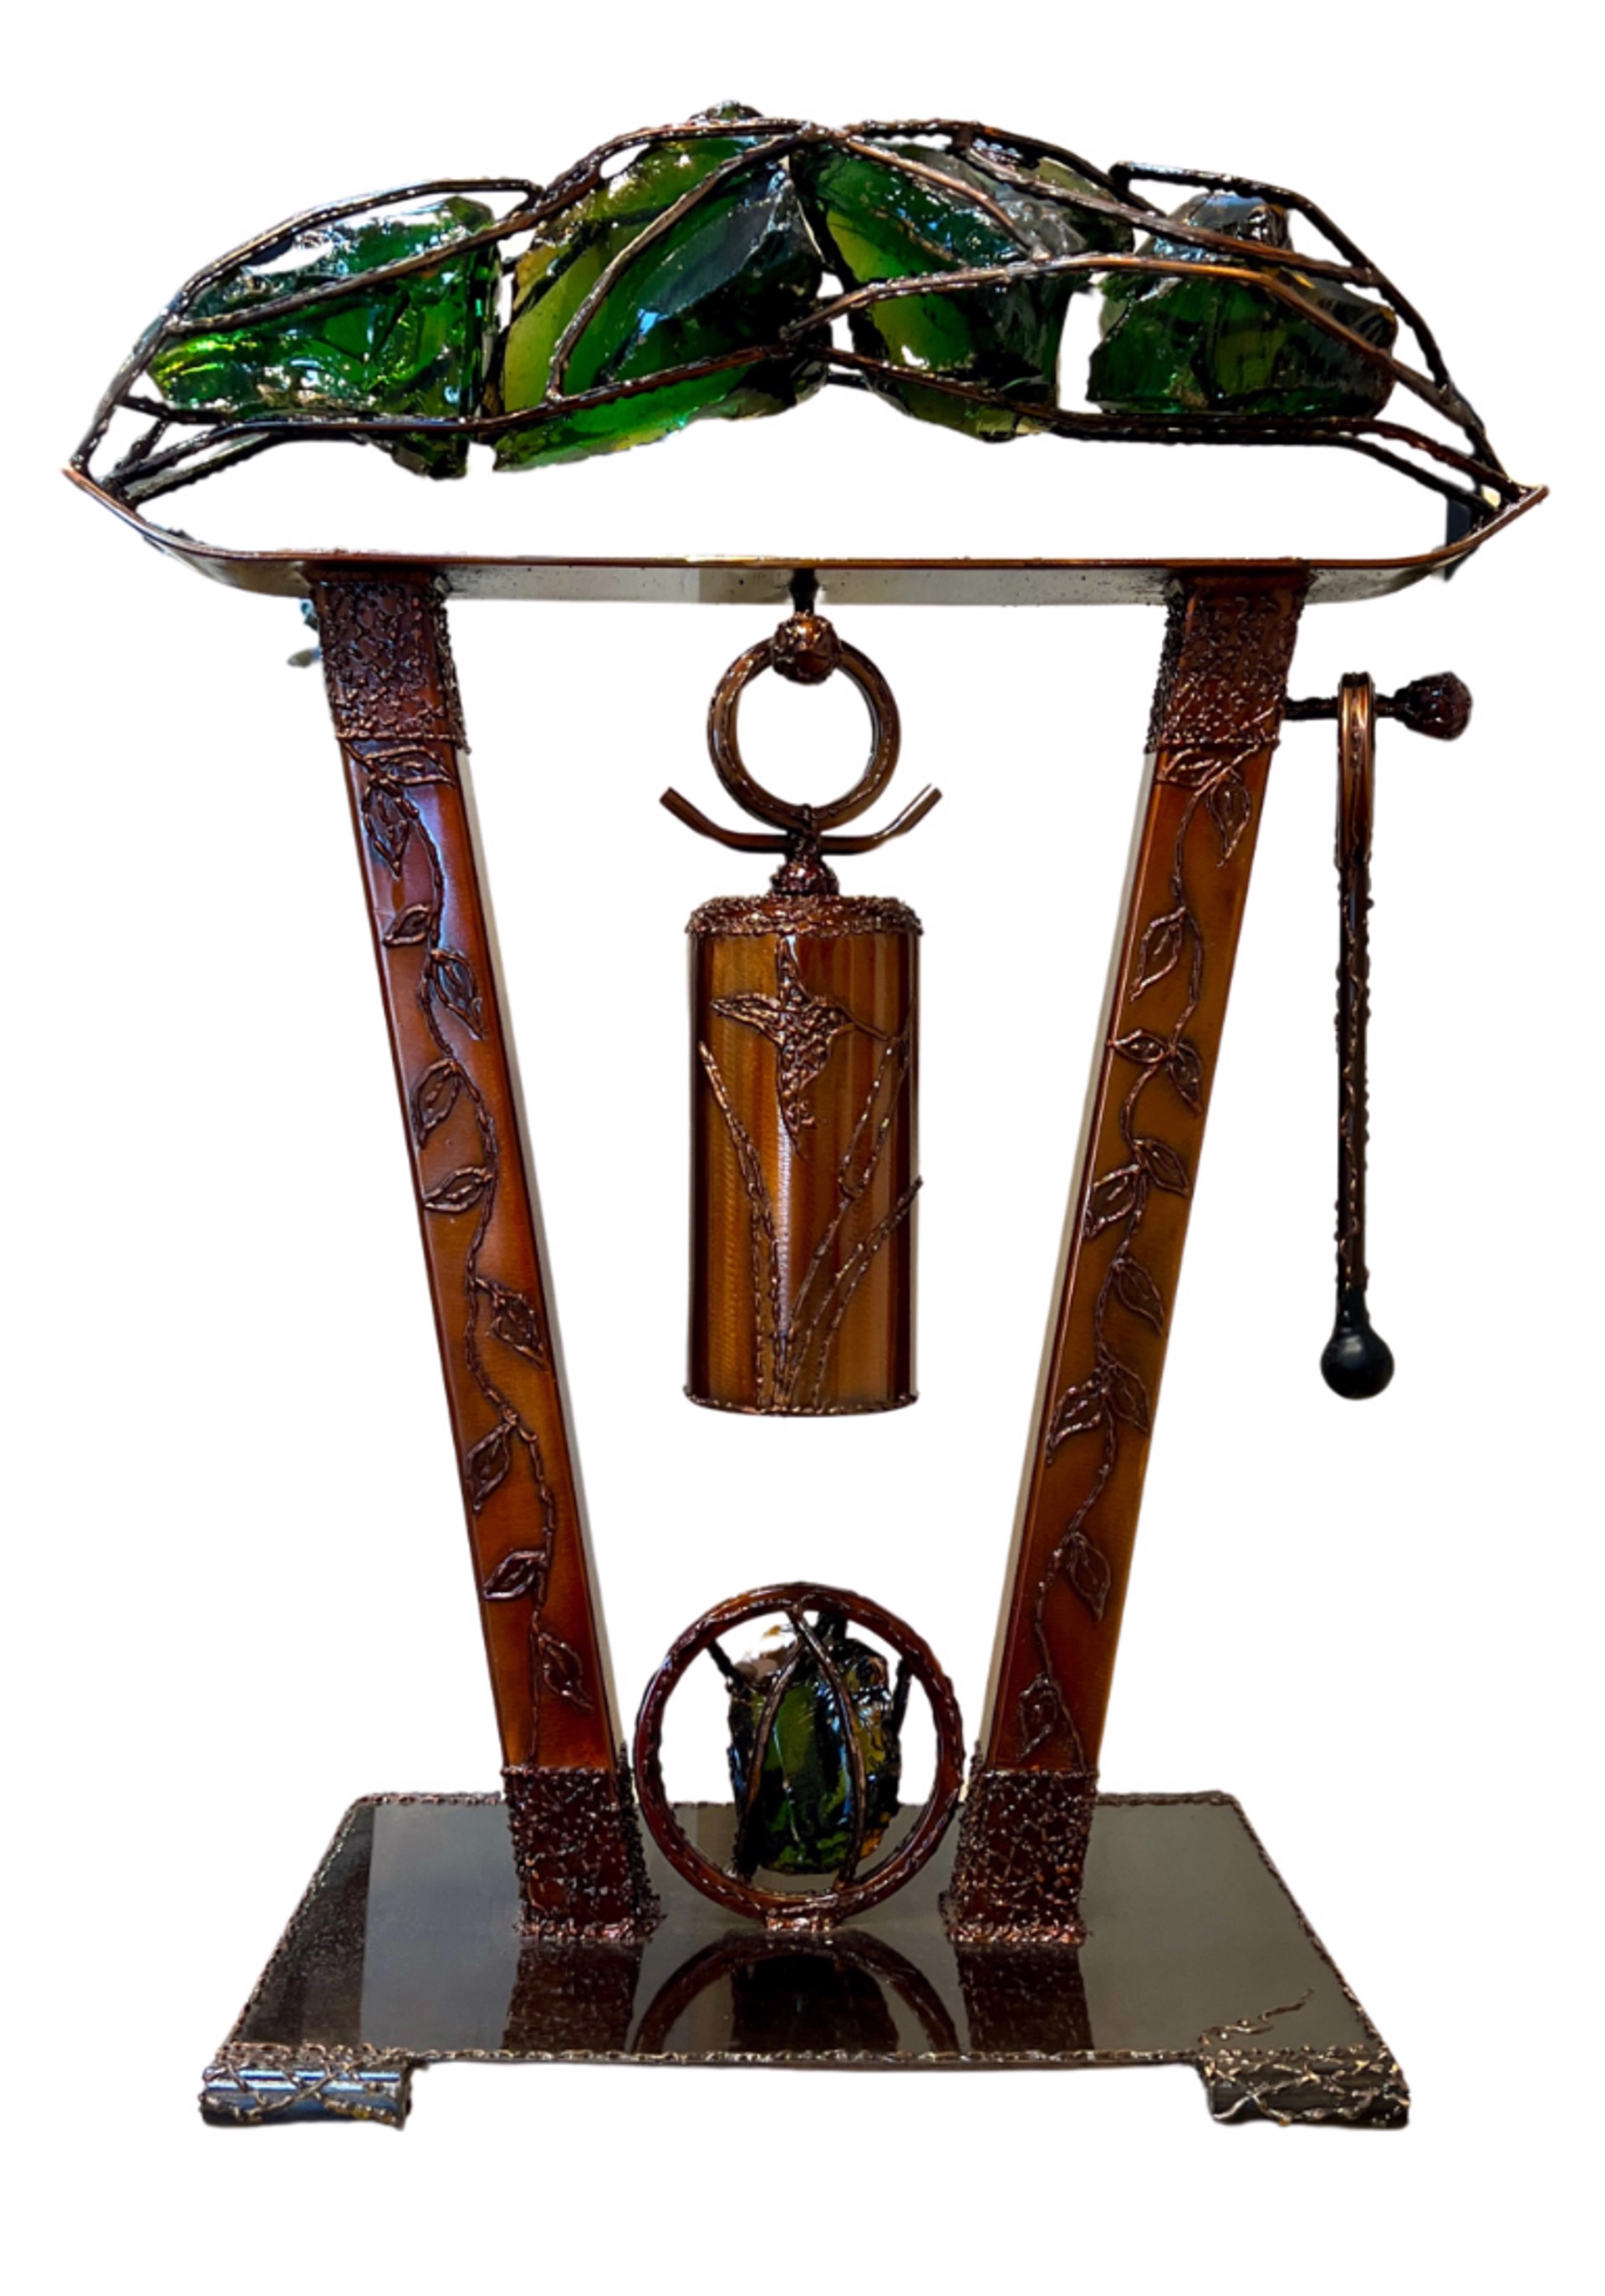 Desktop Bell Sculpture Hummingbird and Cattails with a Crown of Green Glass - Four by Mike Beals